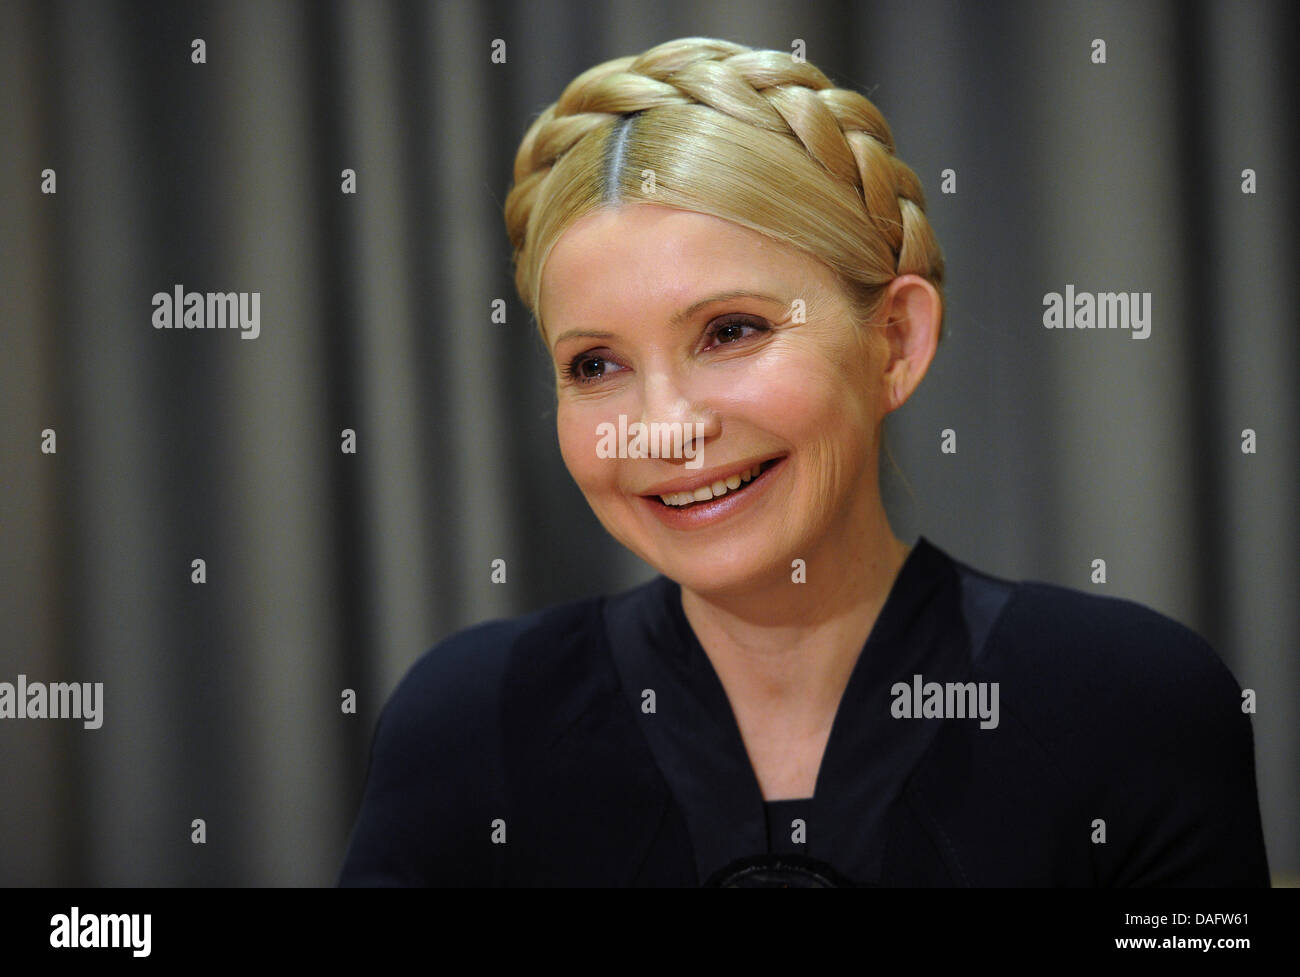 Former head of the Ukrainian government and current leader of the opposition, Yulia Tymoshenko, smiles in Kiev, Ukraine, 2 March 2011. Photo: HANNIBAL Stock Photo